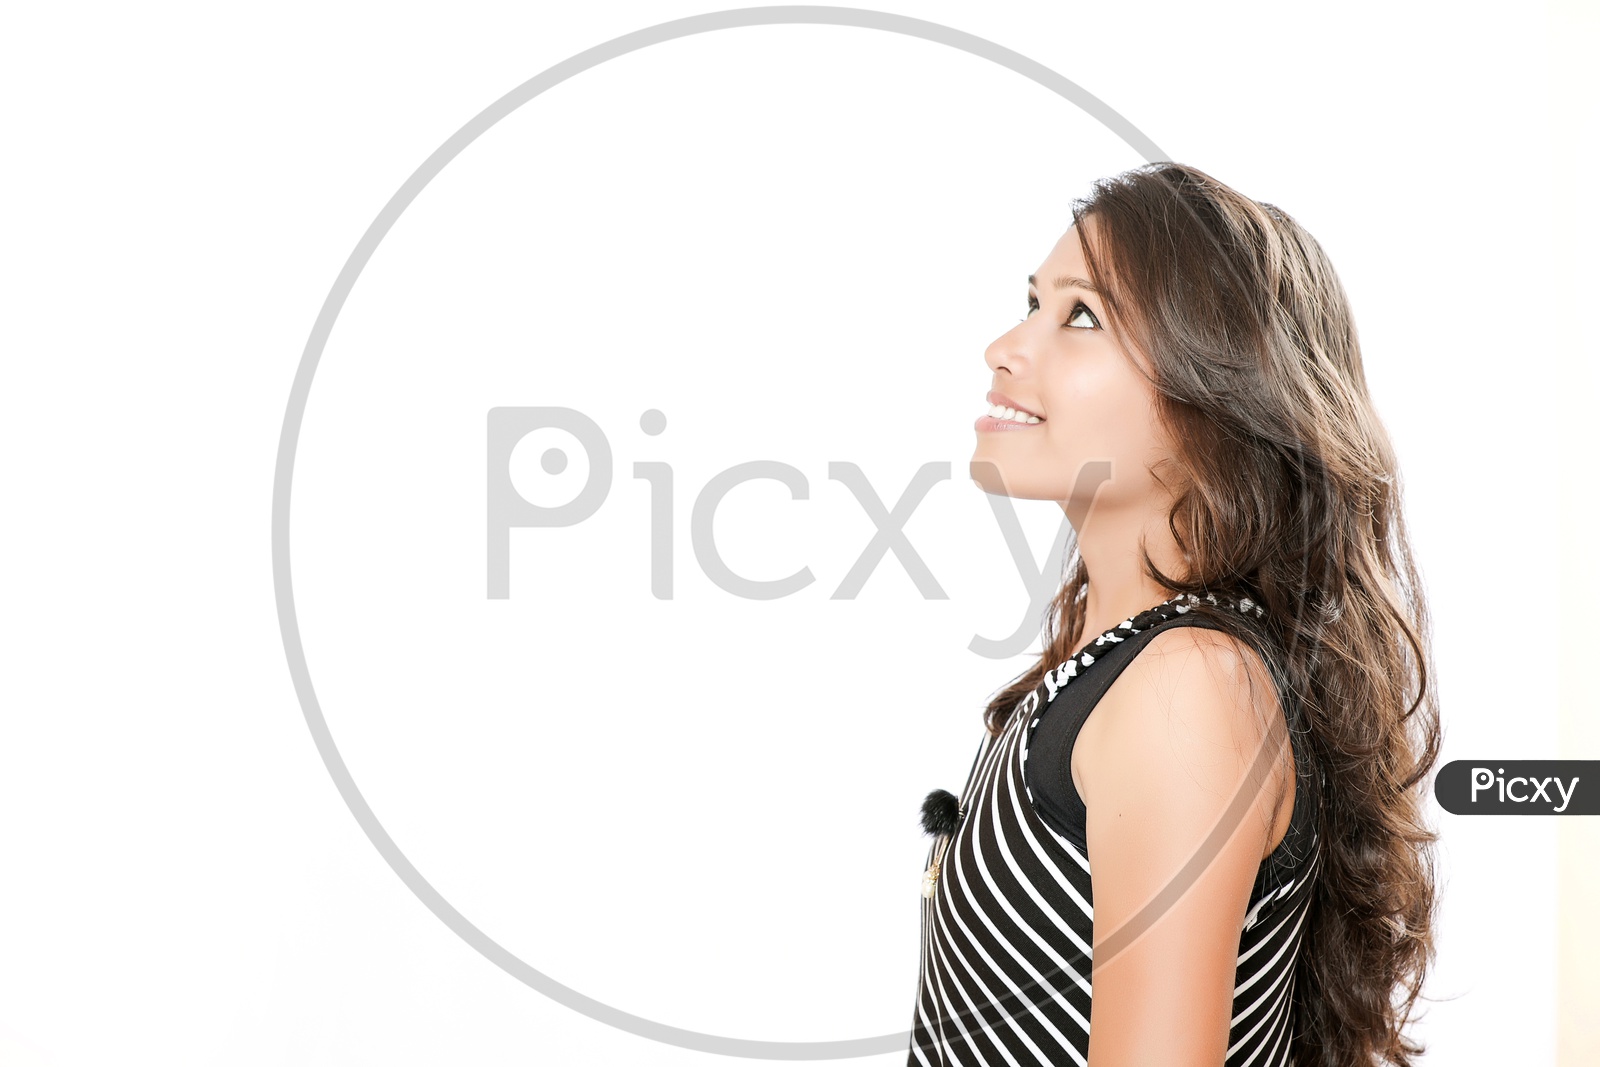 Indian Young Girl With Cute Expressions on an Isolated White Background